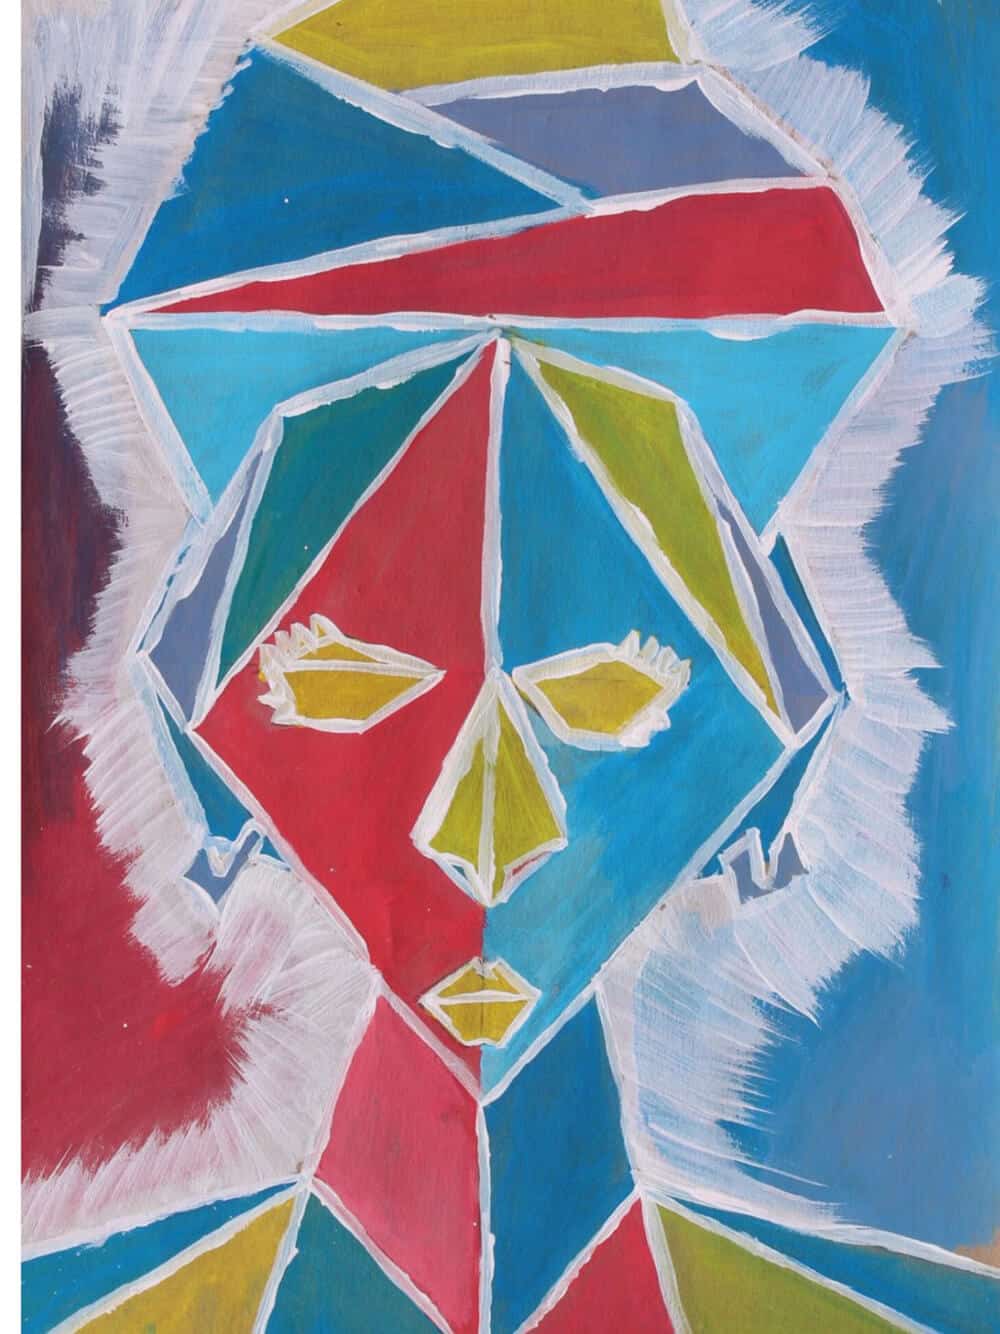 Artwork by Anthony. All artworks inspired by Odili Donald Odita & made by the children that form part of the Lalela Project curriculum. Courtesy of the Lalela Project.